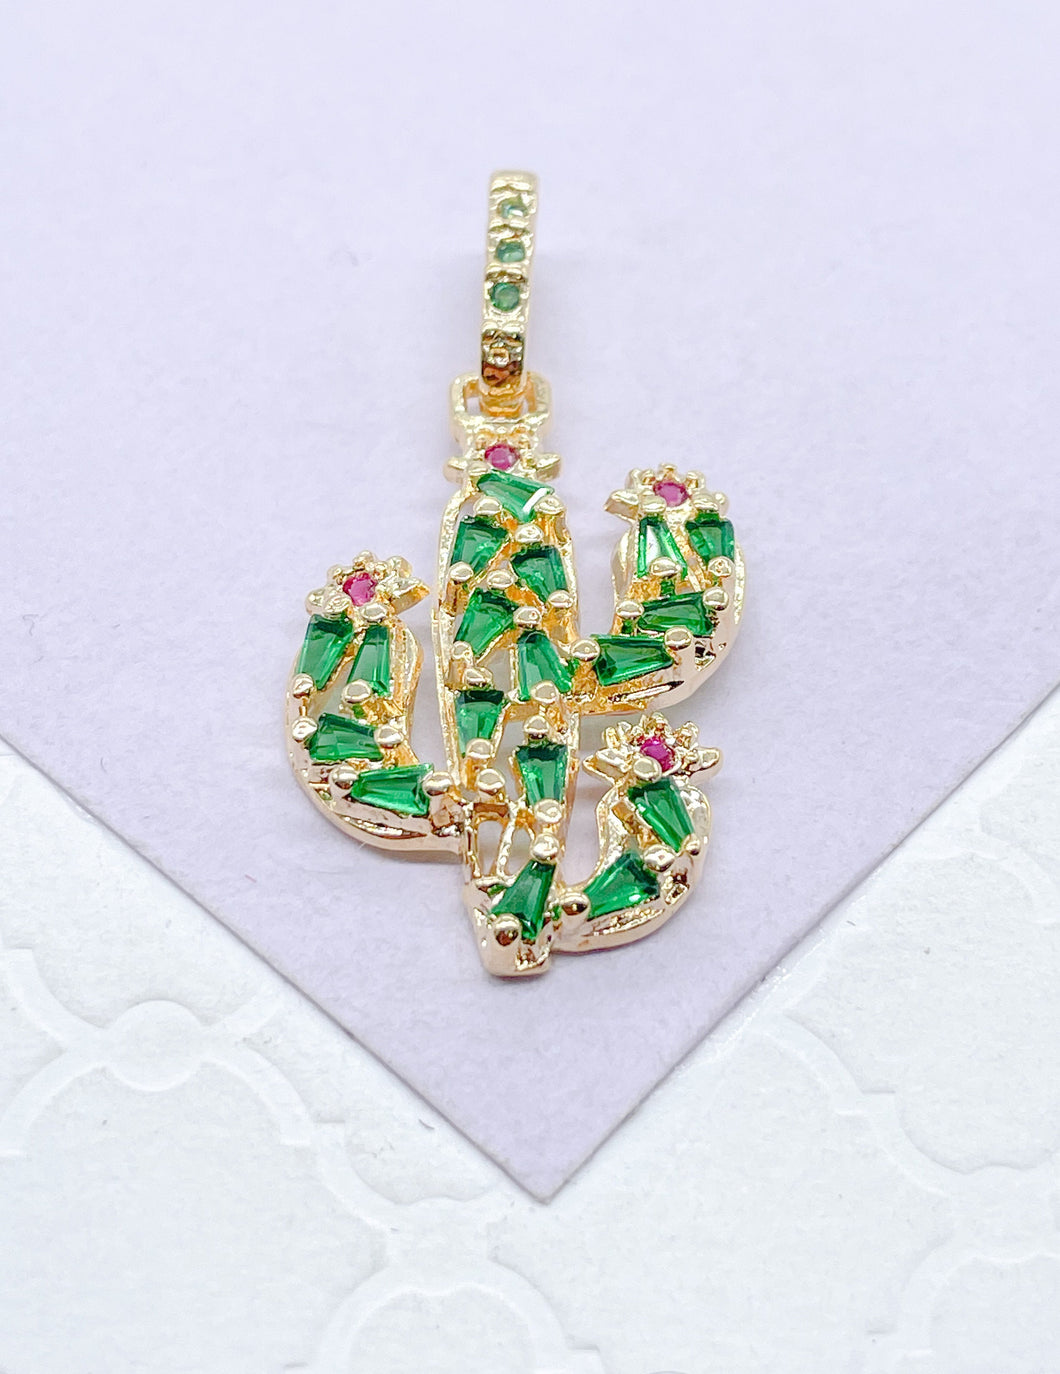 18k Gold Filled Catcus Plant Pendant With Green CZ and small Magenta CZ Stones